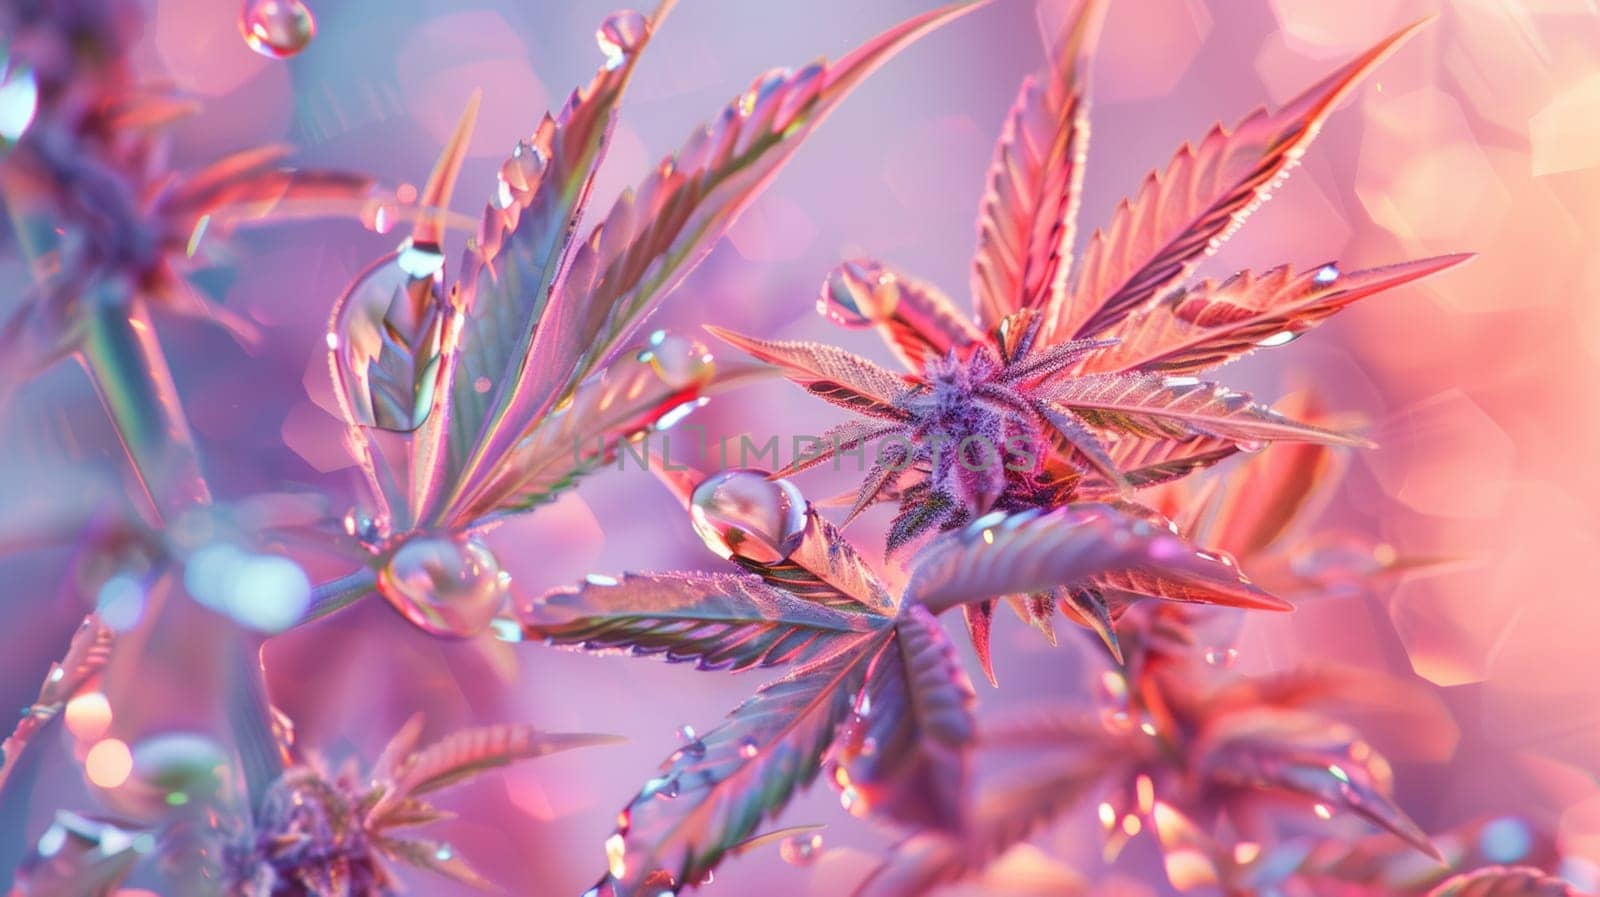 A close up of a marijuana plant with water droplets on it